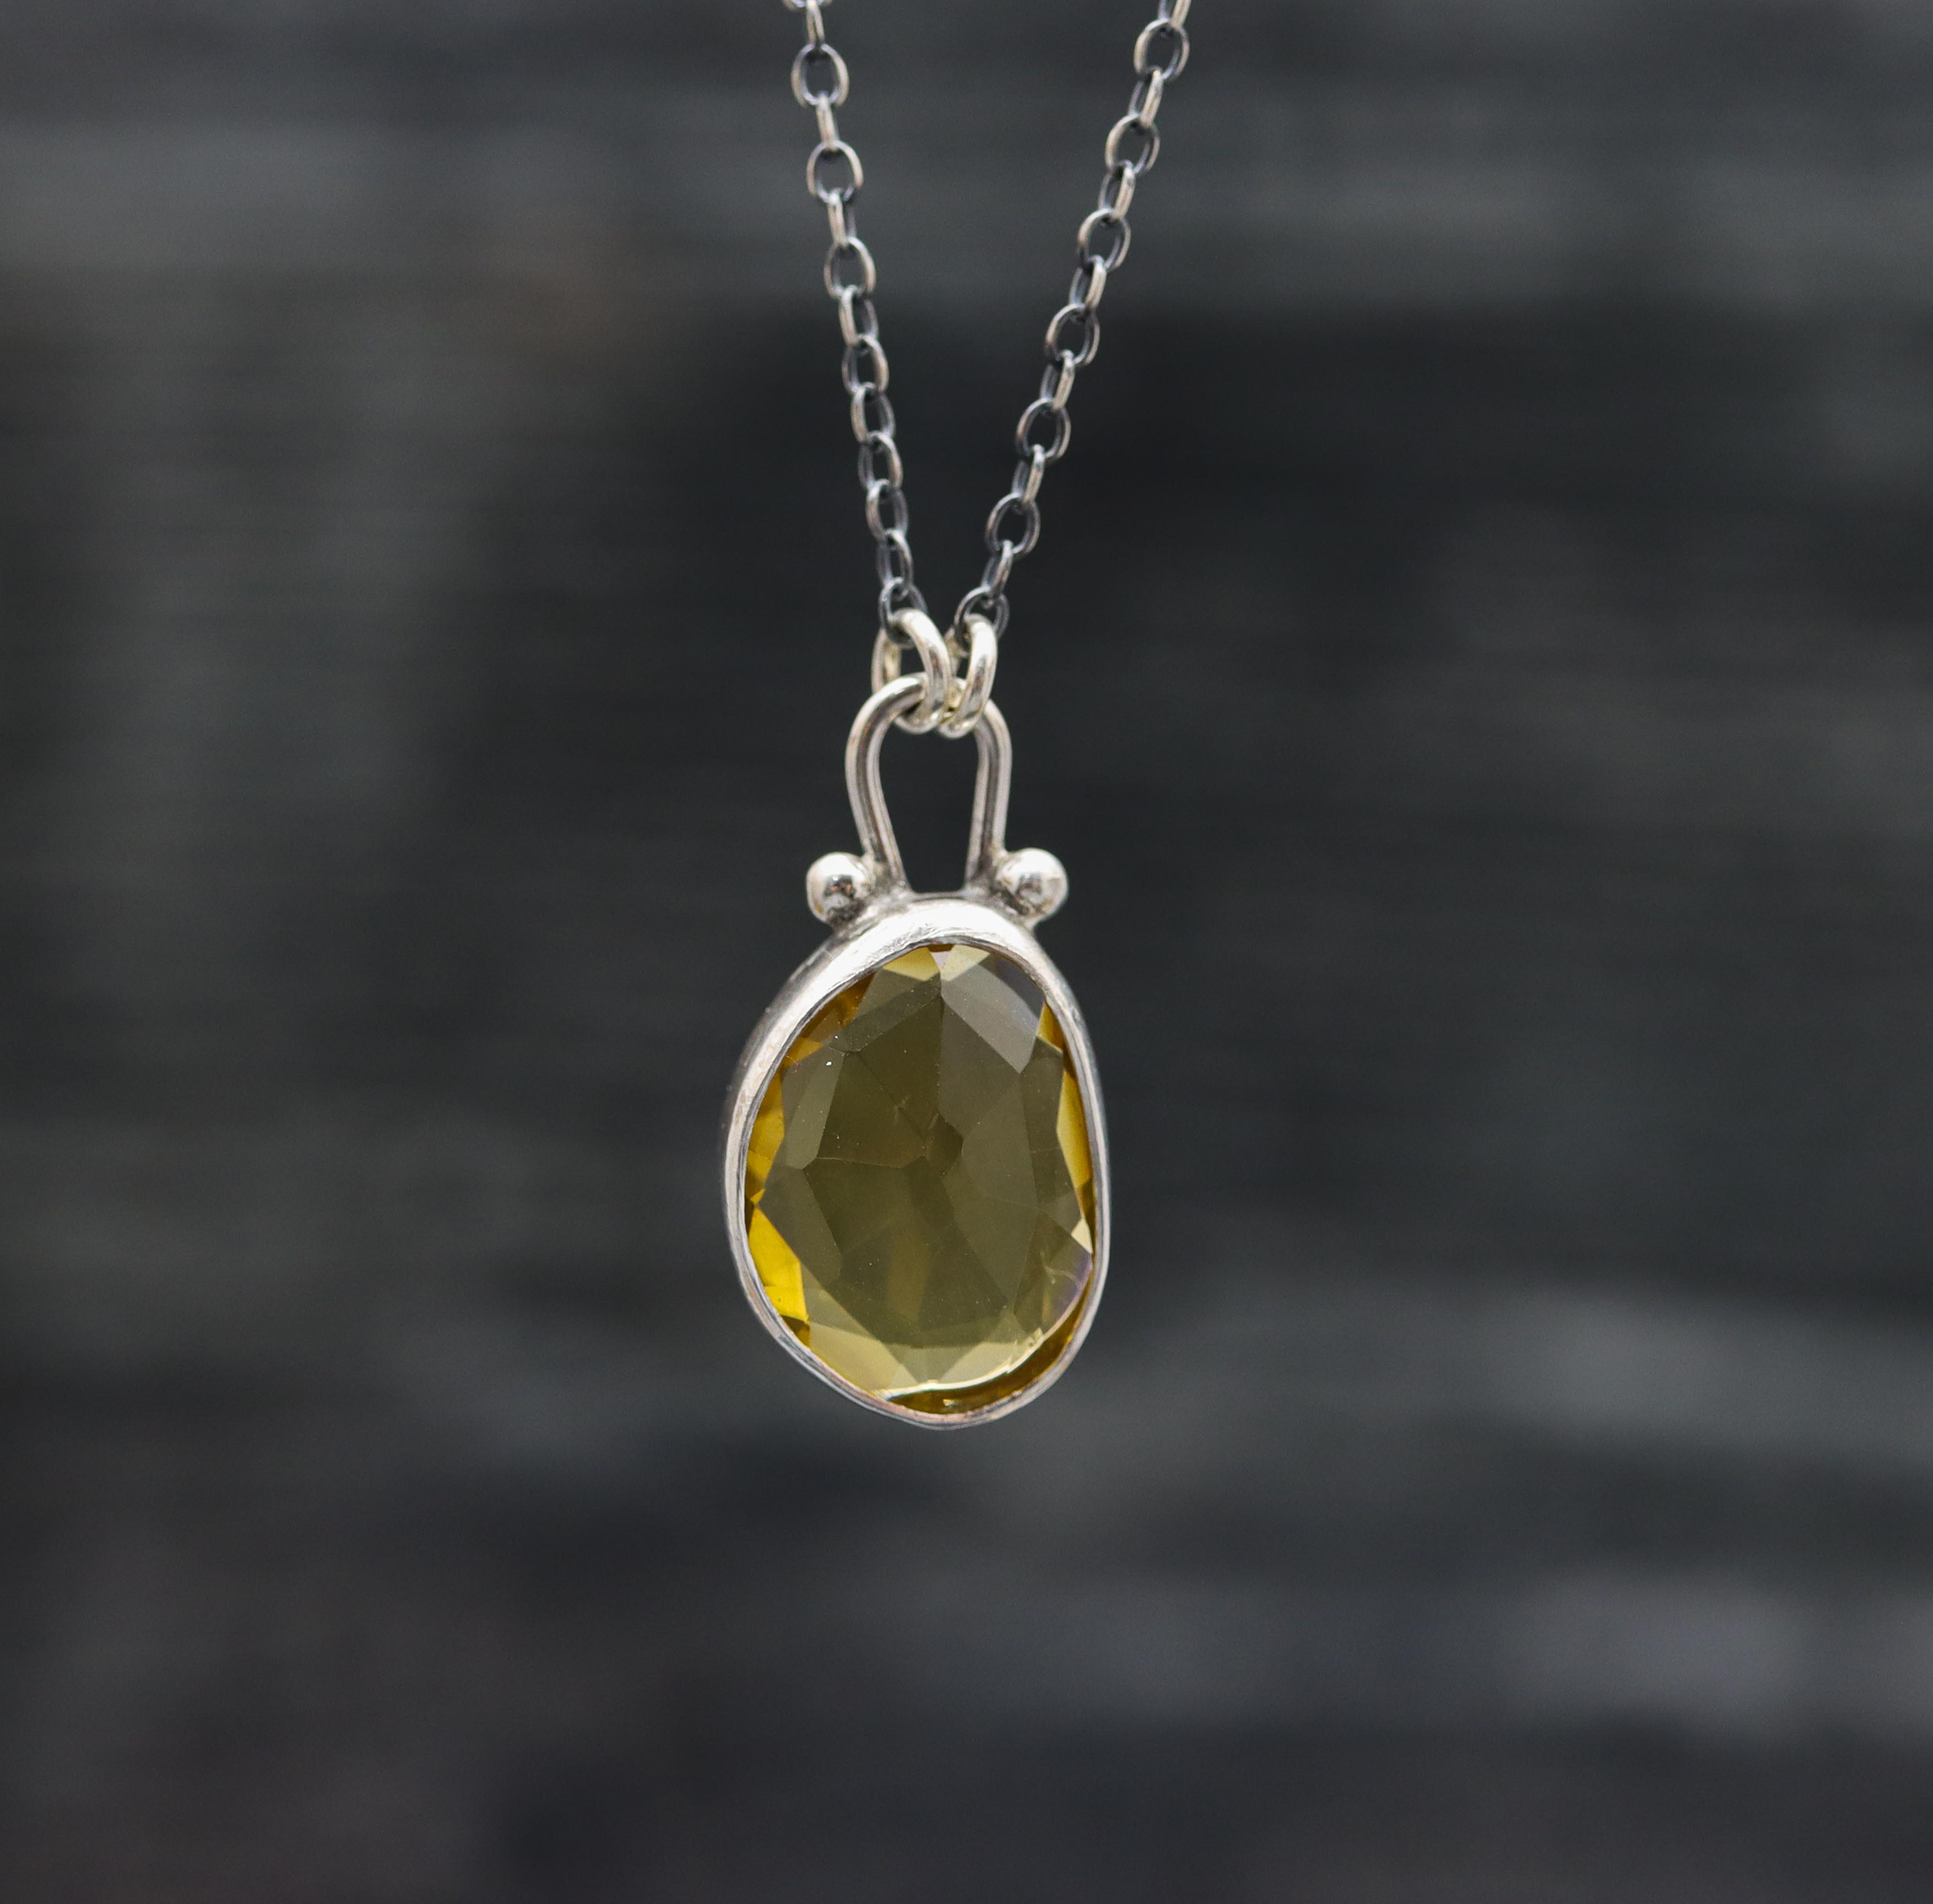 Sunny Yellow Citrine Pendant Necklace Sterling Silver